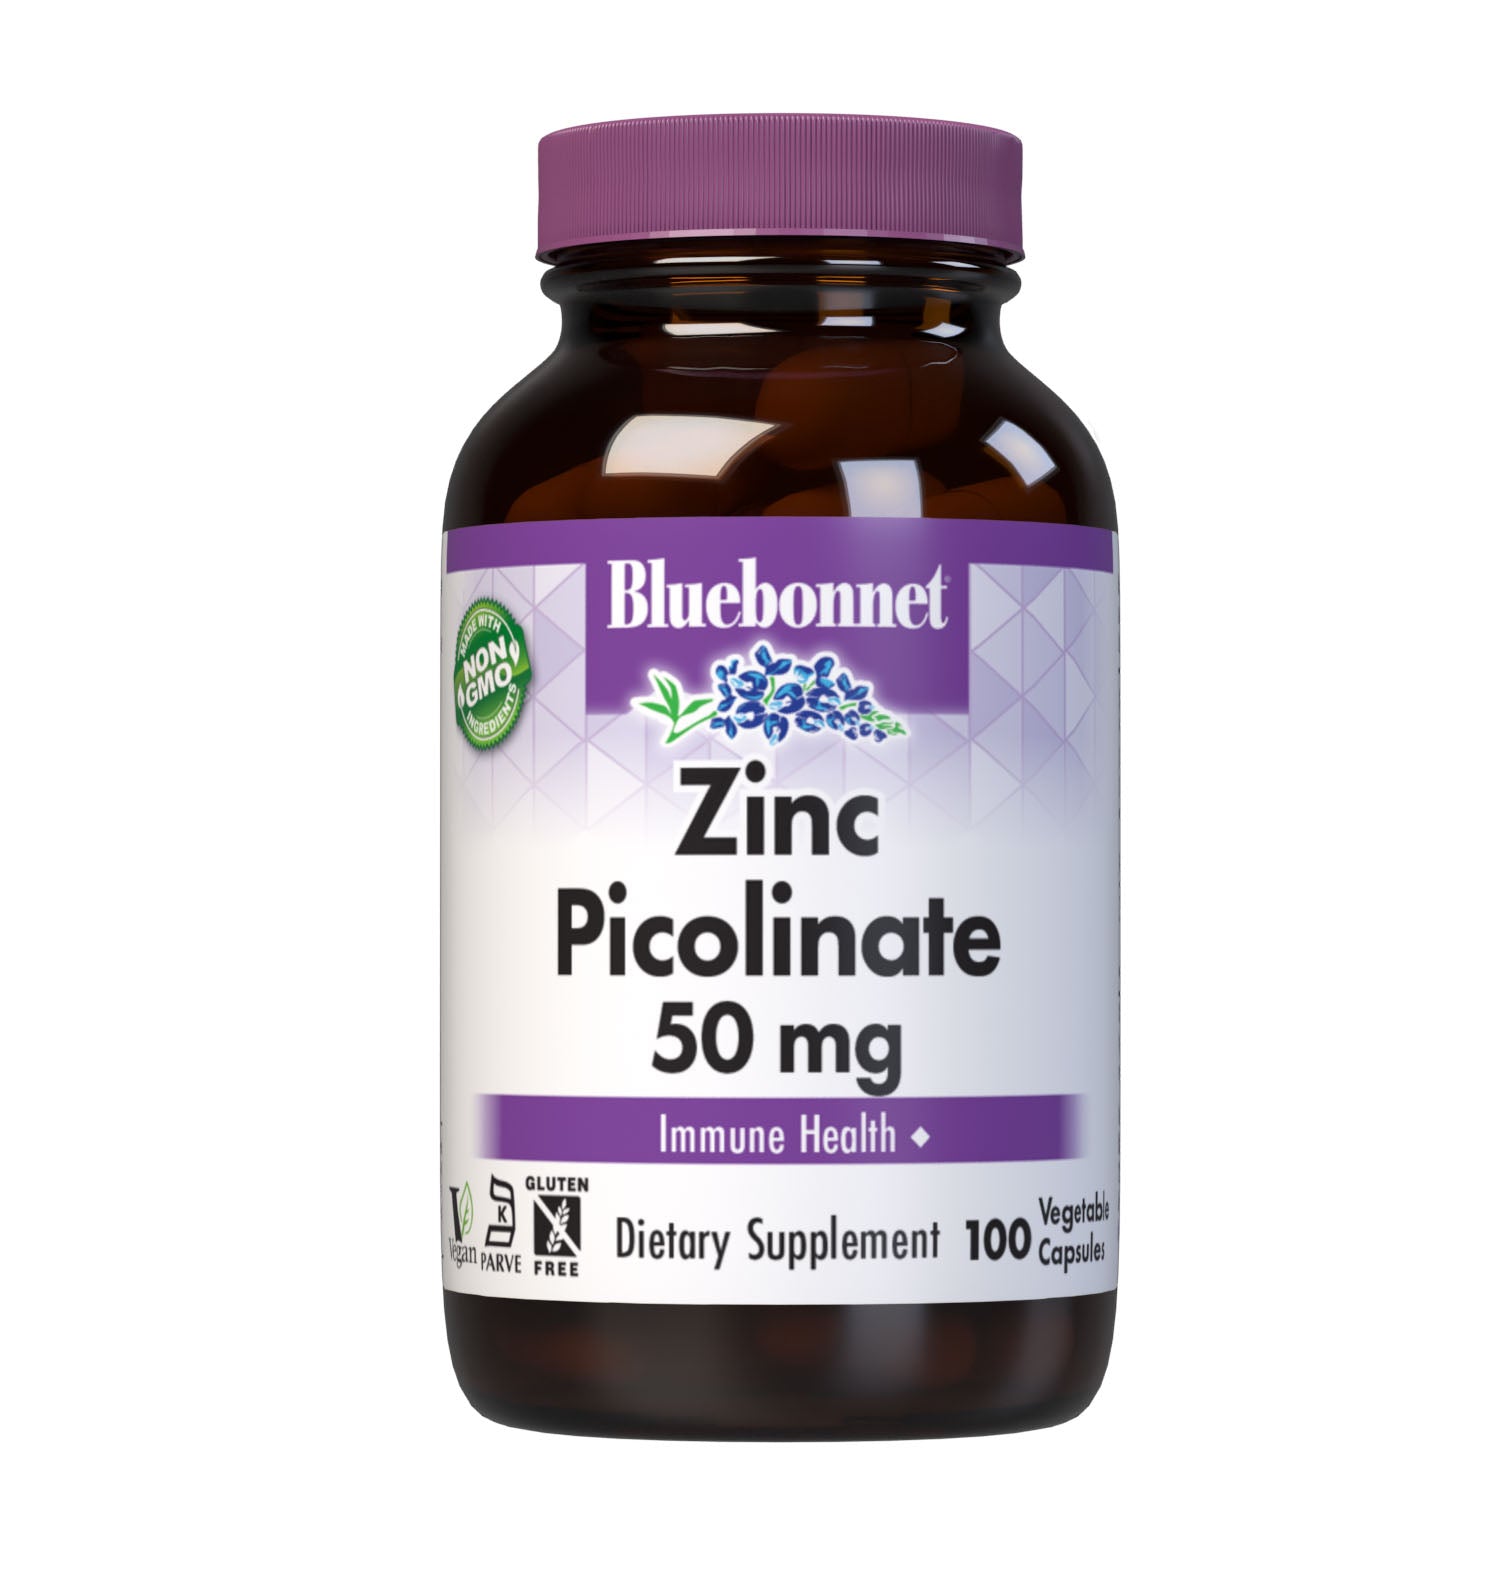 Bluebonnet's Zinc Picolinate 50 mg 100 Vegetable Capsules are formulated with zinc in a chelate of picolinic acid. Zinc is an essential element that is necessary for immune health and enzyme function. #size_100 count